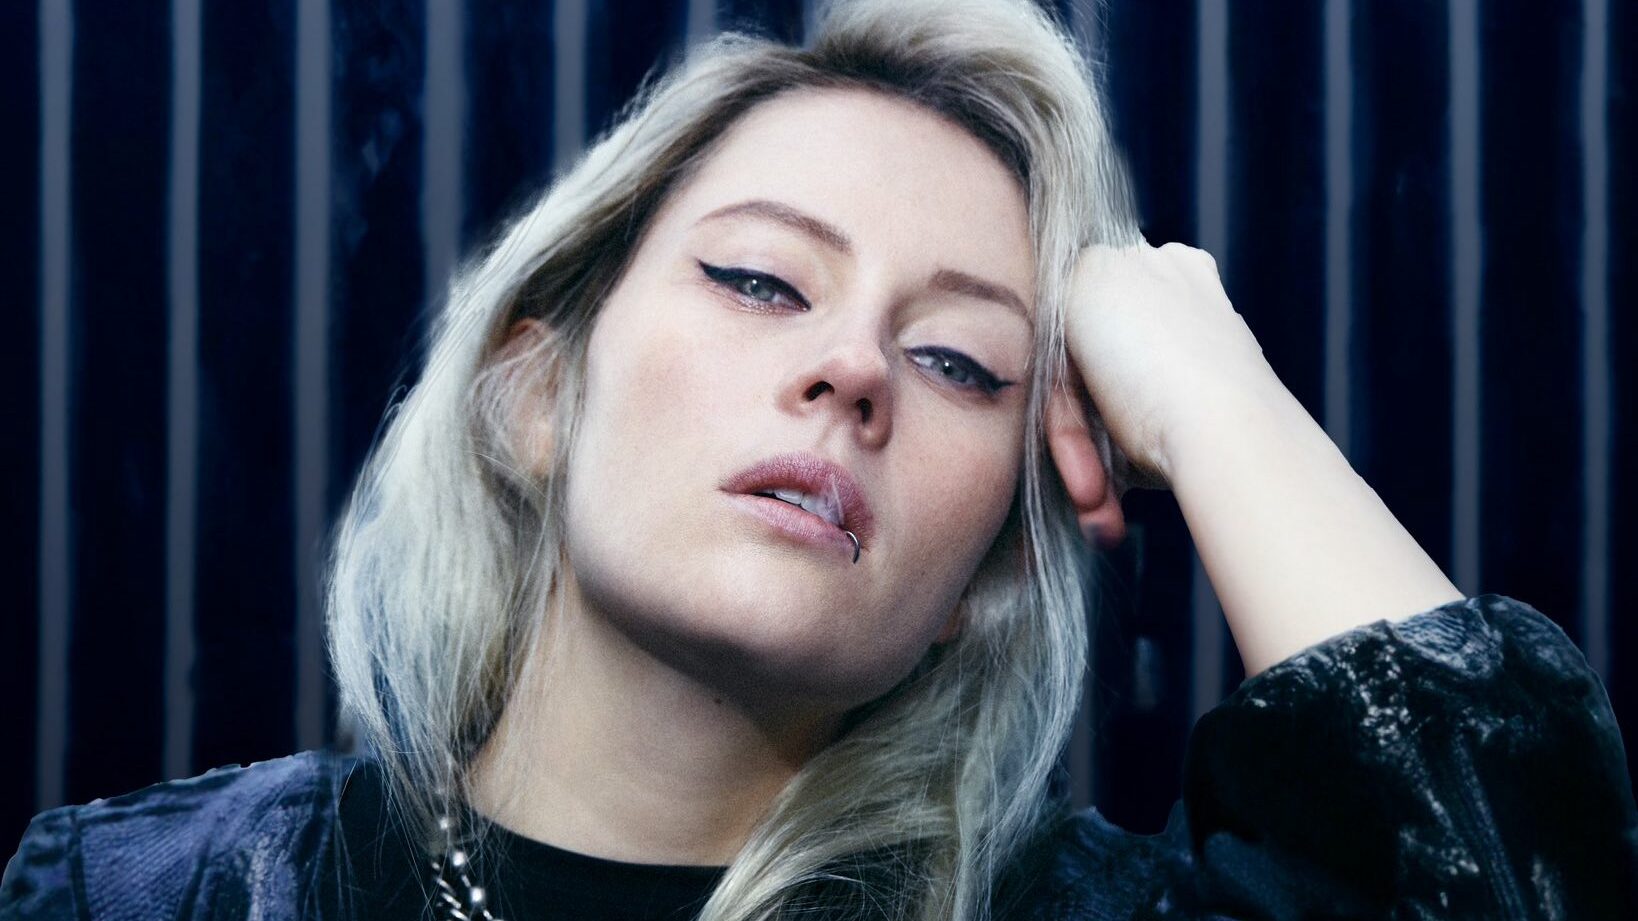 Belgian DJ Charlotte de Witte who will play at festival NEOPOP 2023 in Portugal